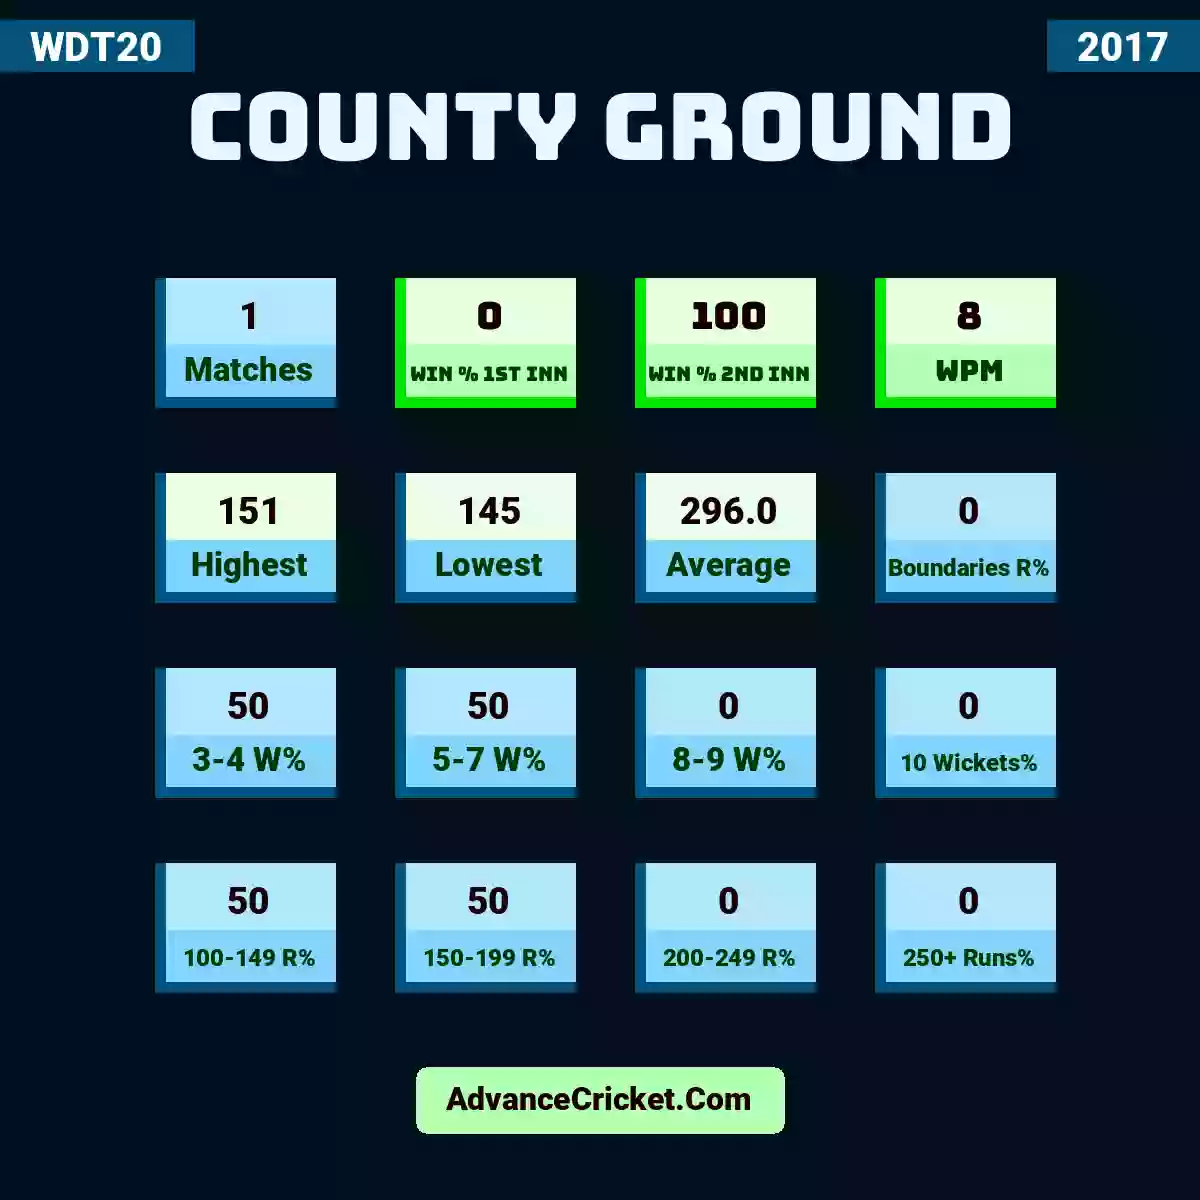 Image showing County Ground with Matches: 1, Win % 1st Inn: 0, Win % 2nd Inn: 100, WPM: 8, Highest: 151, Lowest: 145, Average: 296.0, Boundaries R%: 0, 3-4 W%: 50, 5-7 W%: 50, 8-9 W%: 0, 10 Wickets%: 0, 100-149 R%: 50, 150-199 R%: 50, 200-249 R%: 0, 250+ Runs%: 0.